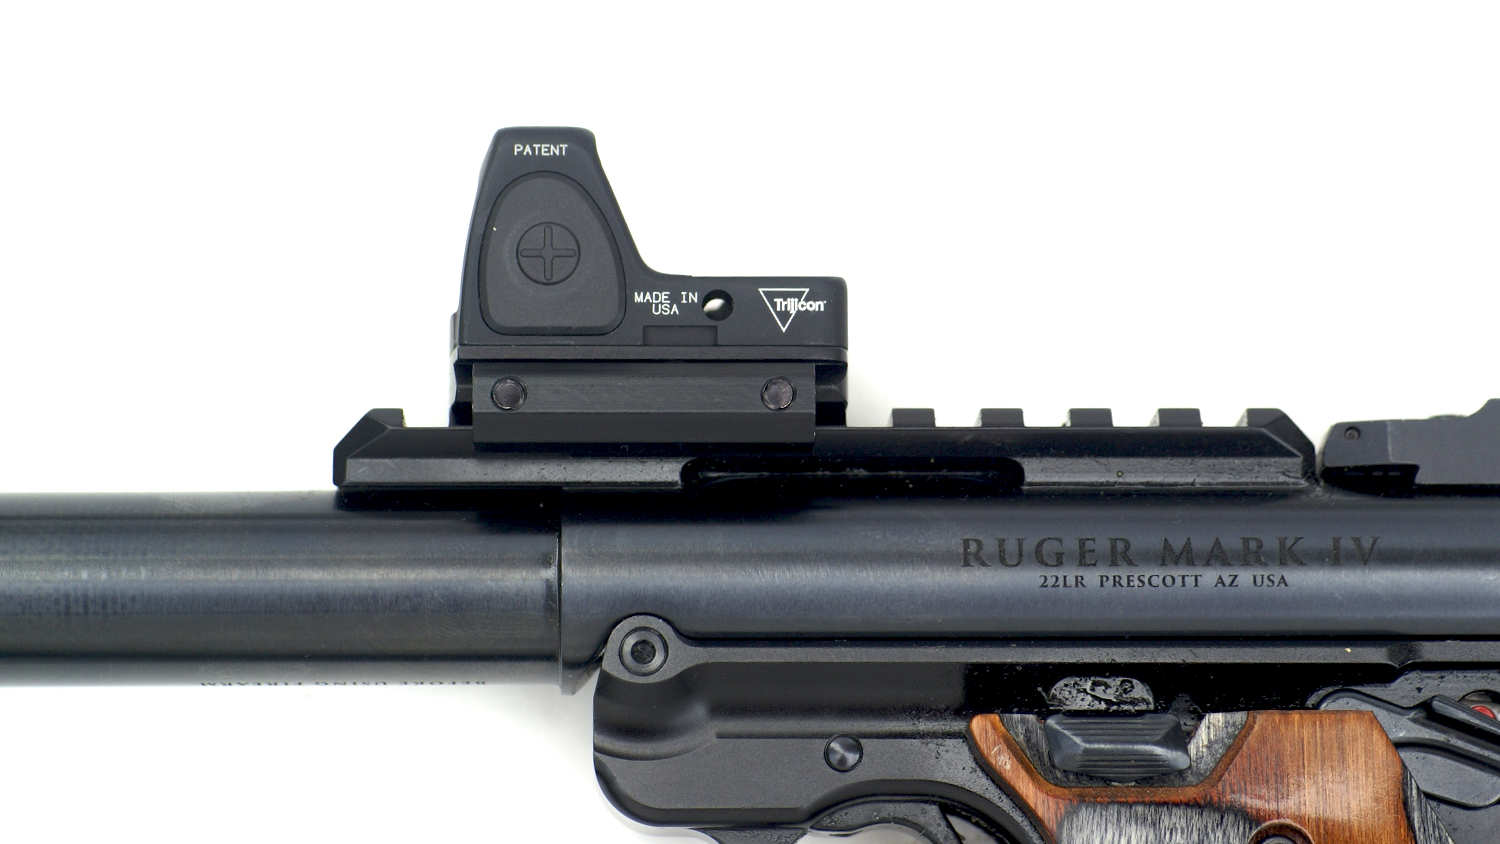 Trijicon RMR2 optic on Ruger Mark IV